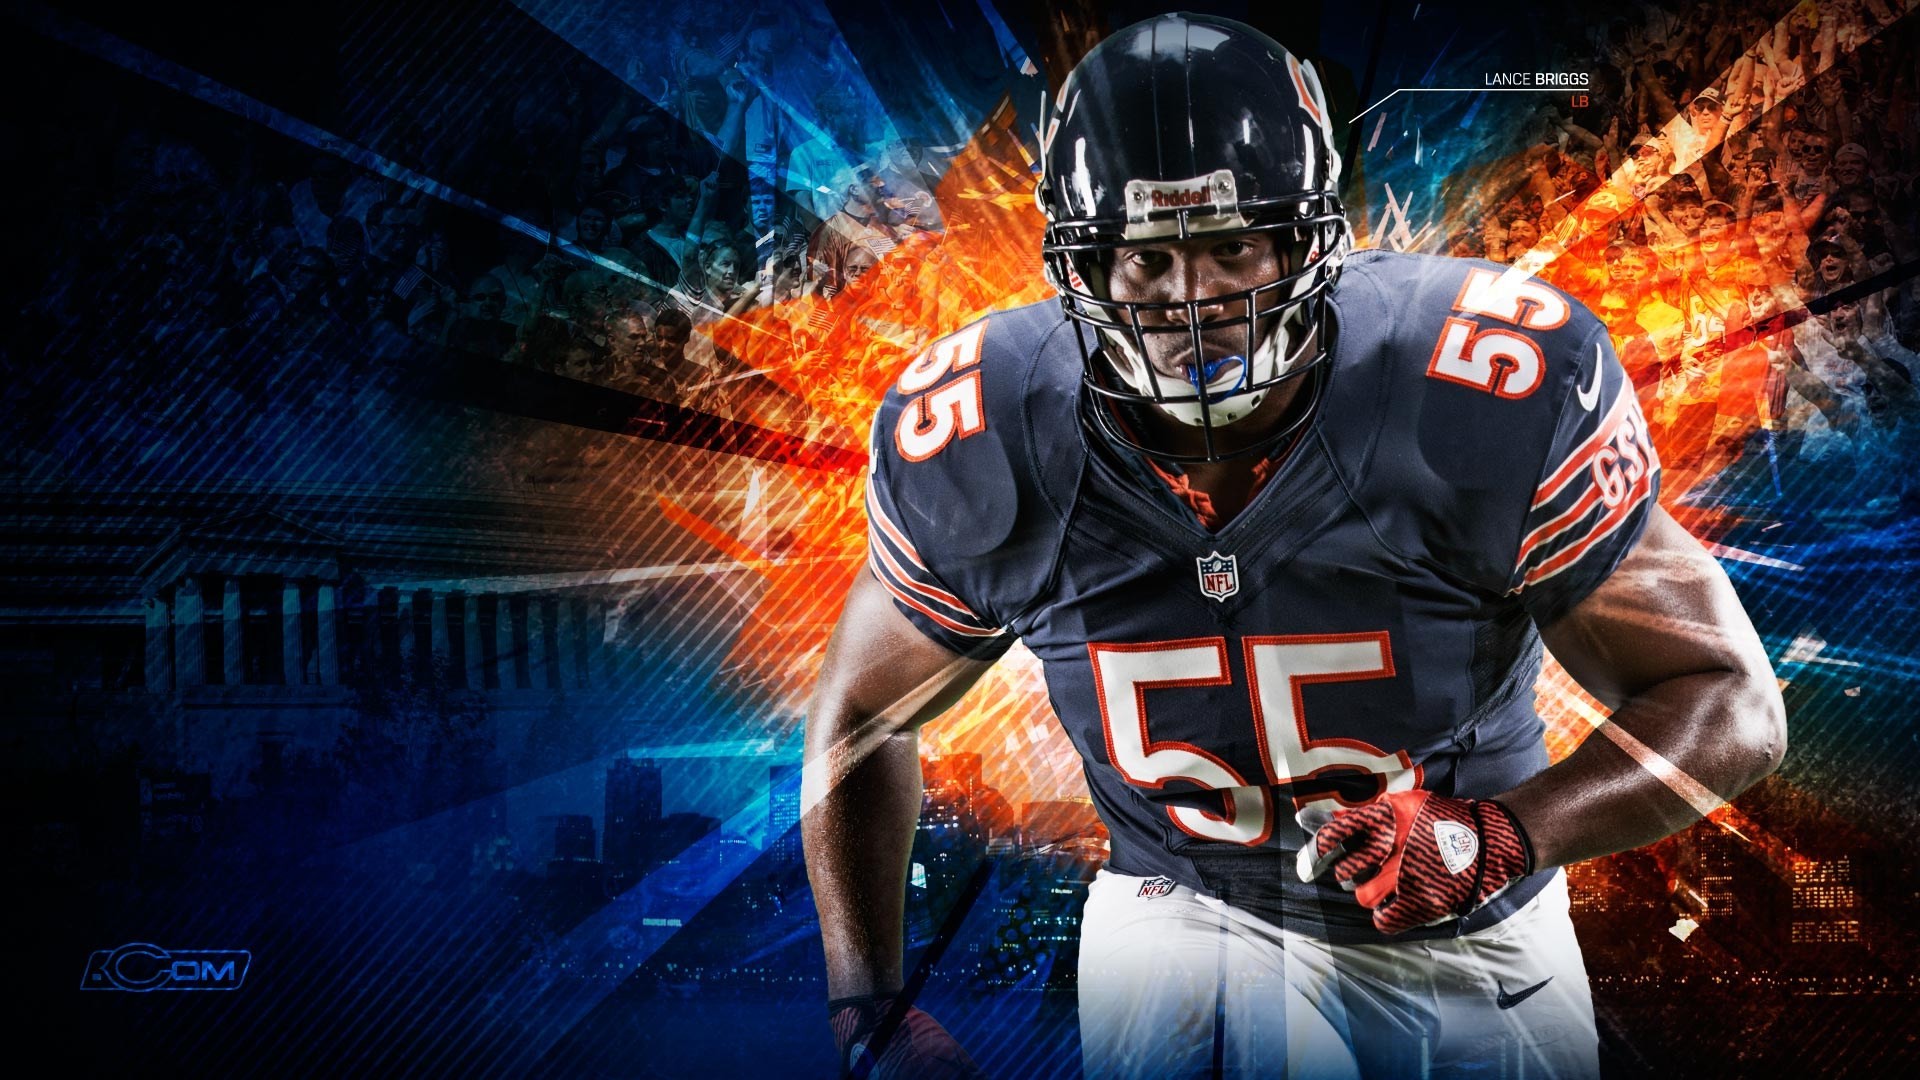 HD Desktop Wallpaper Chicago Bears NFL with high-resolution 1920x1080 pixel. You can use this wallpaper for your Mac or Windows Desktop Background, iPhone, Android or Tablet and another Smartphone device